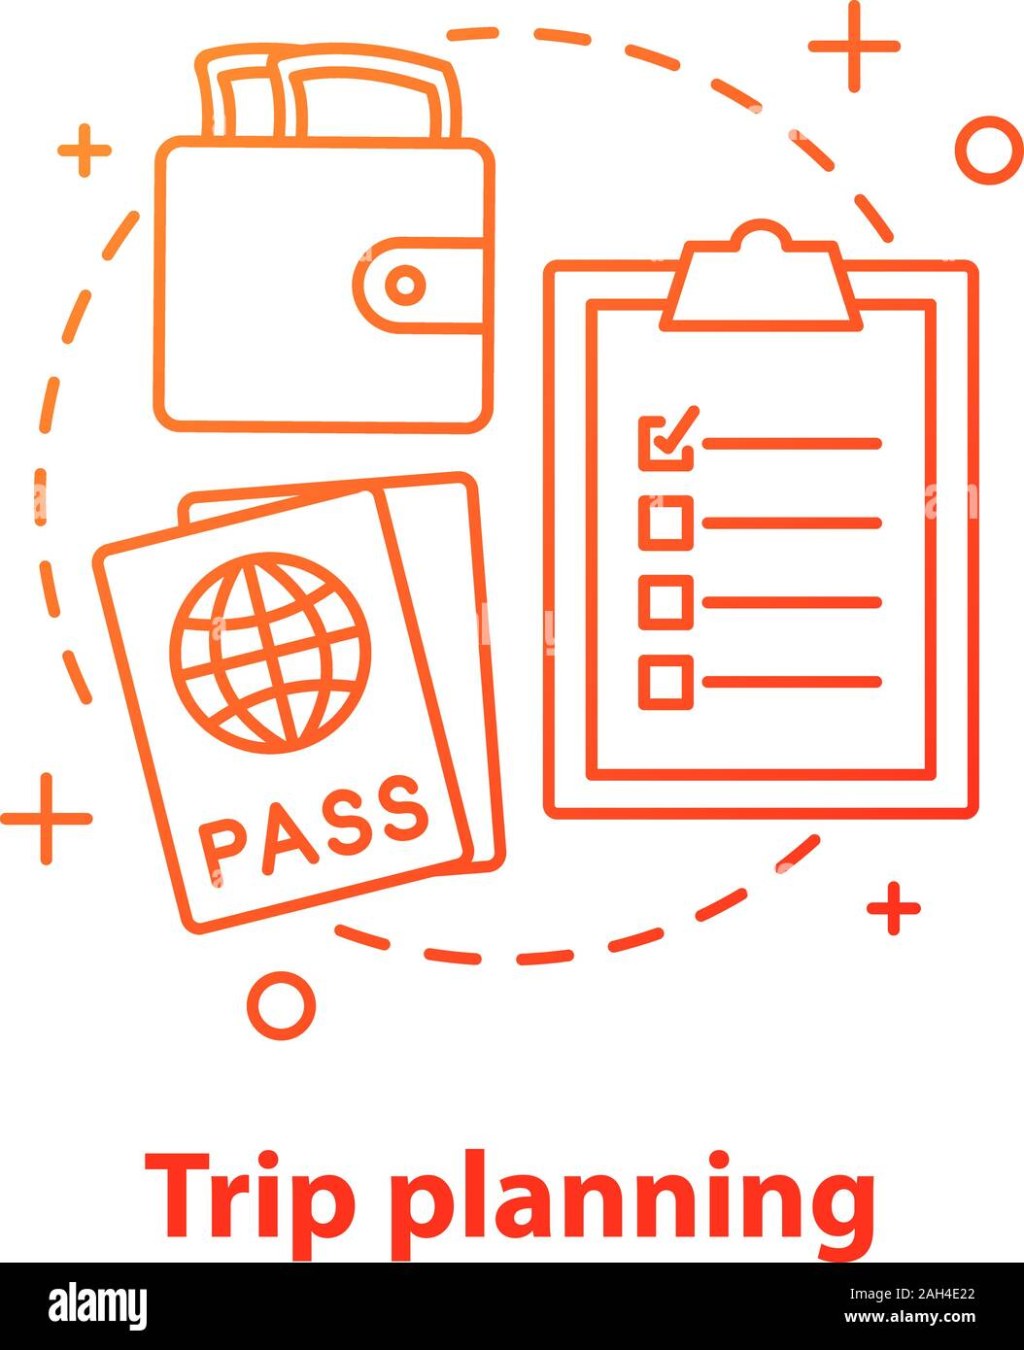 Picture of: Going on trip concept icon